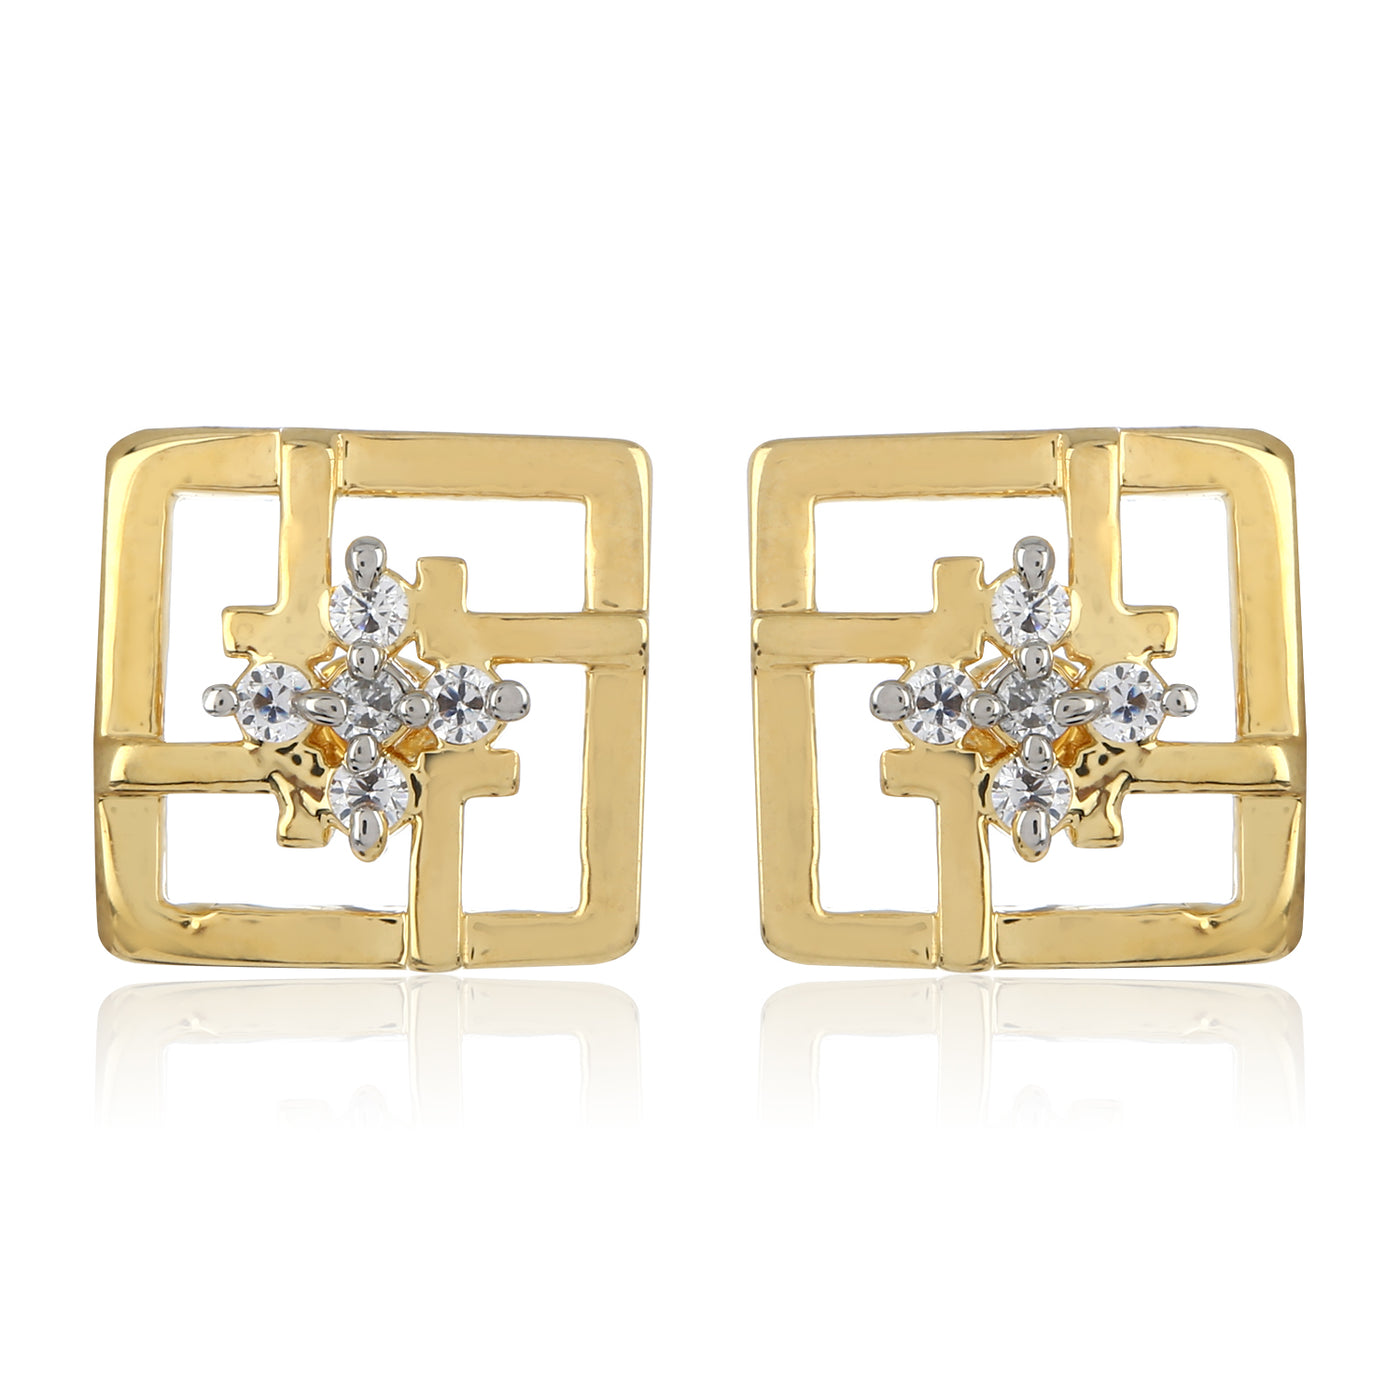 Square Shaped Stud With AD Stone earrings